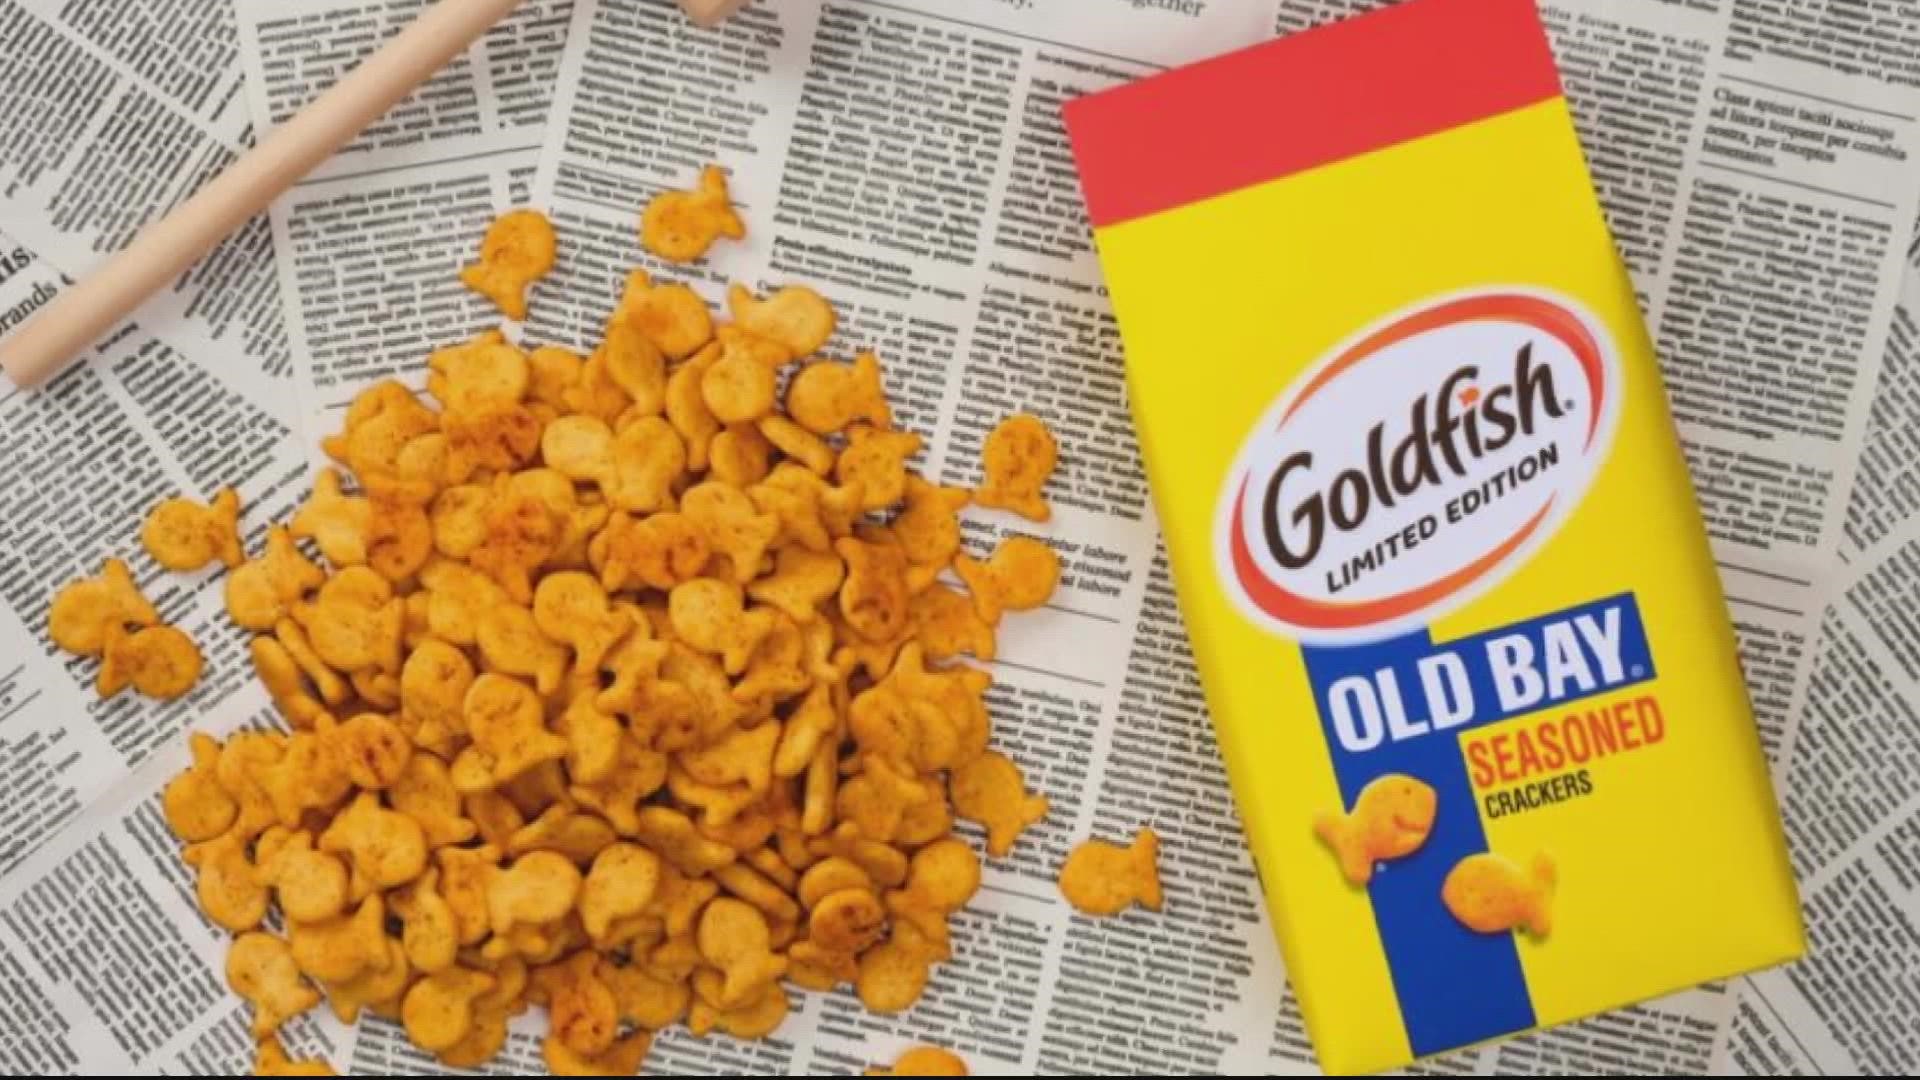 From Goldfish to beer, is Old Bay flavored things the new pumpkin spice?